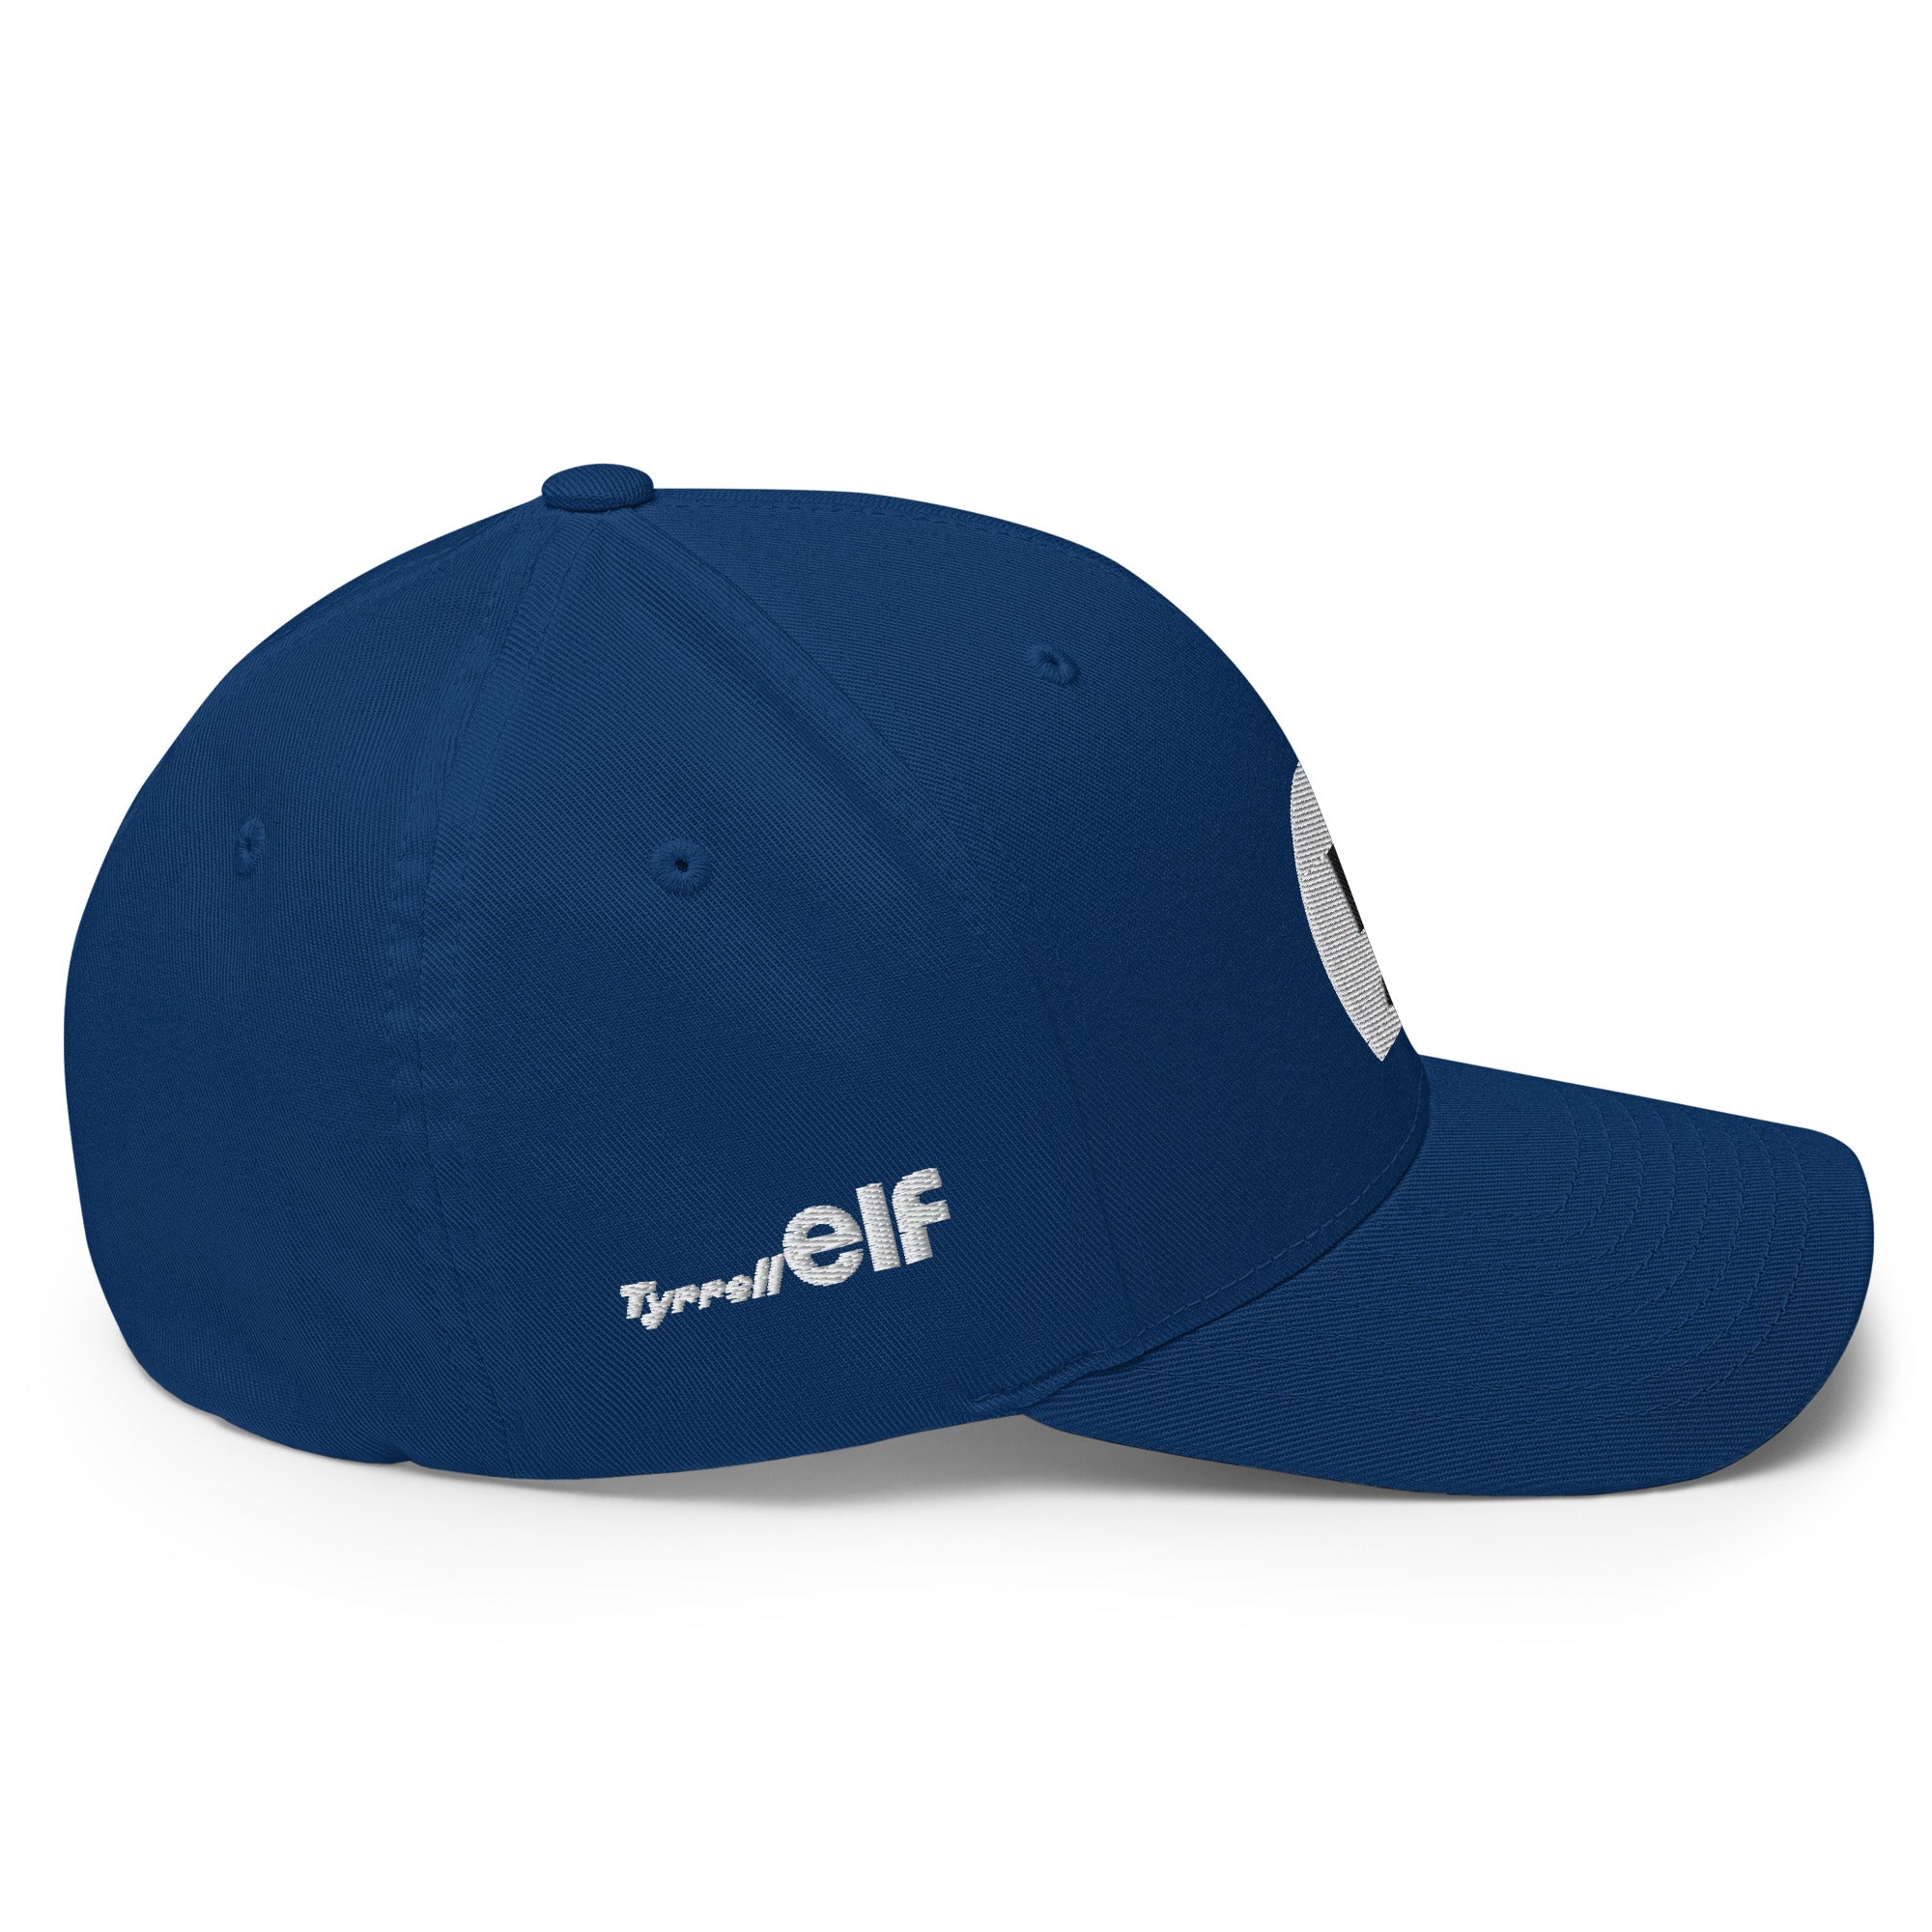 5: Elf Tyrrell Ford Racing - Jackie Stewart Blue cap right side